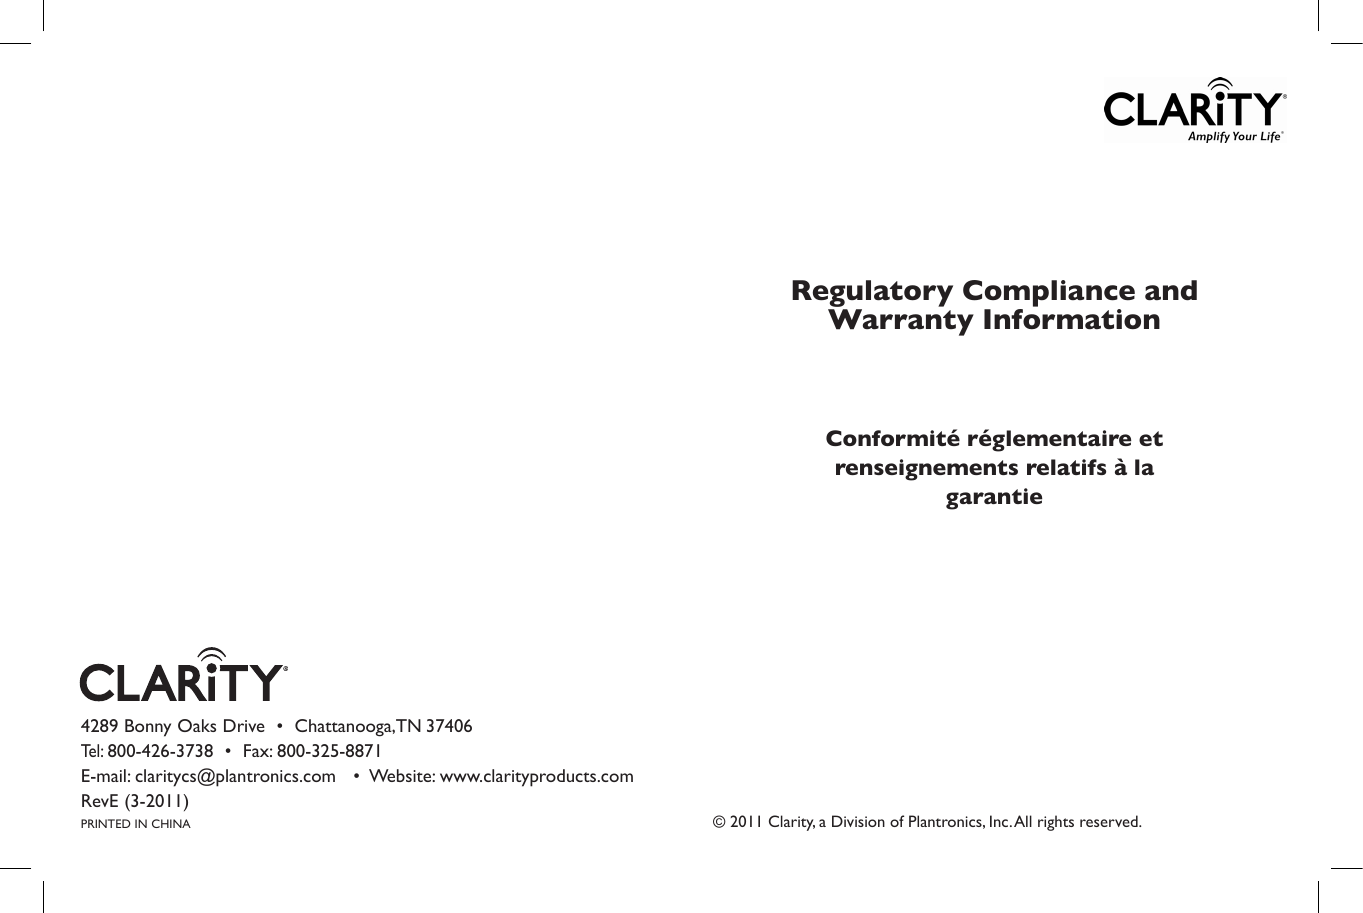 © 2011 Clarity, a Division of Plantronics, Inc. All rights reserved.Regulatory Compliance and Warranty InformationConformité réglementaire et renseignements relatifs à la garantie4289 Bonny Oaks Drive  •  Chattanooga, TN 37406   Tel: 800-426-3738  •  Fax: 800-325-8871     E-mail: claritycs@plantronics.com   •  Website: www.clarityproducts.com RevE (3-2011) PRINTED IN CHINA